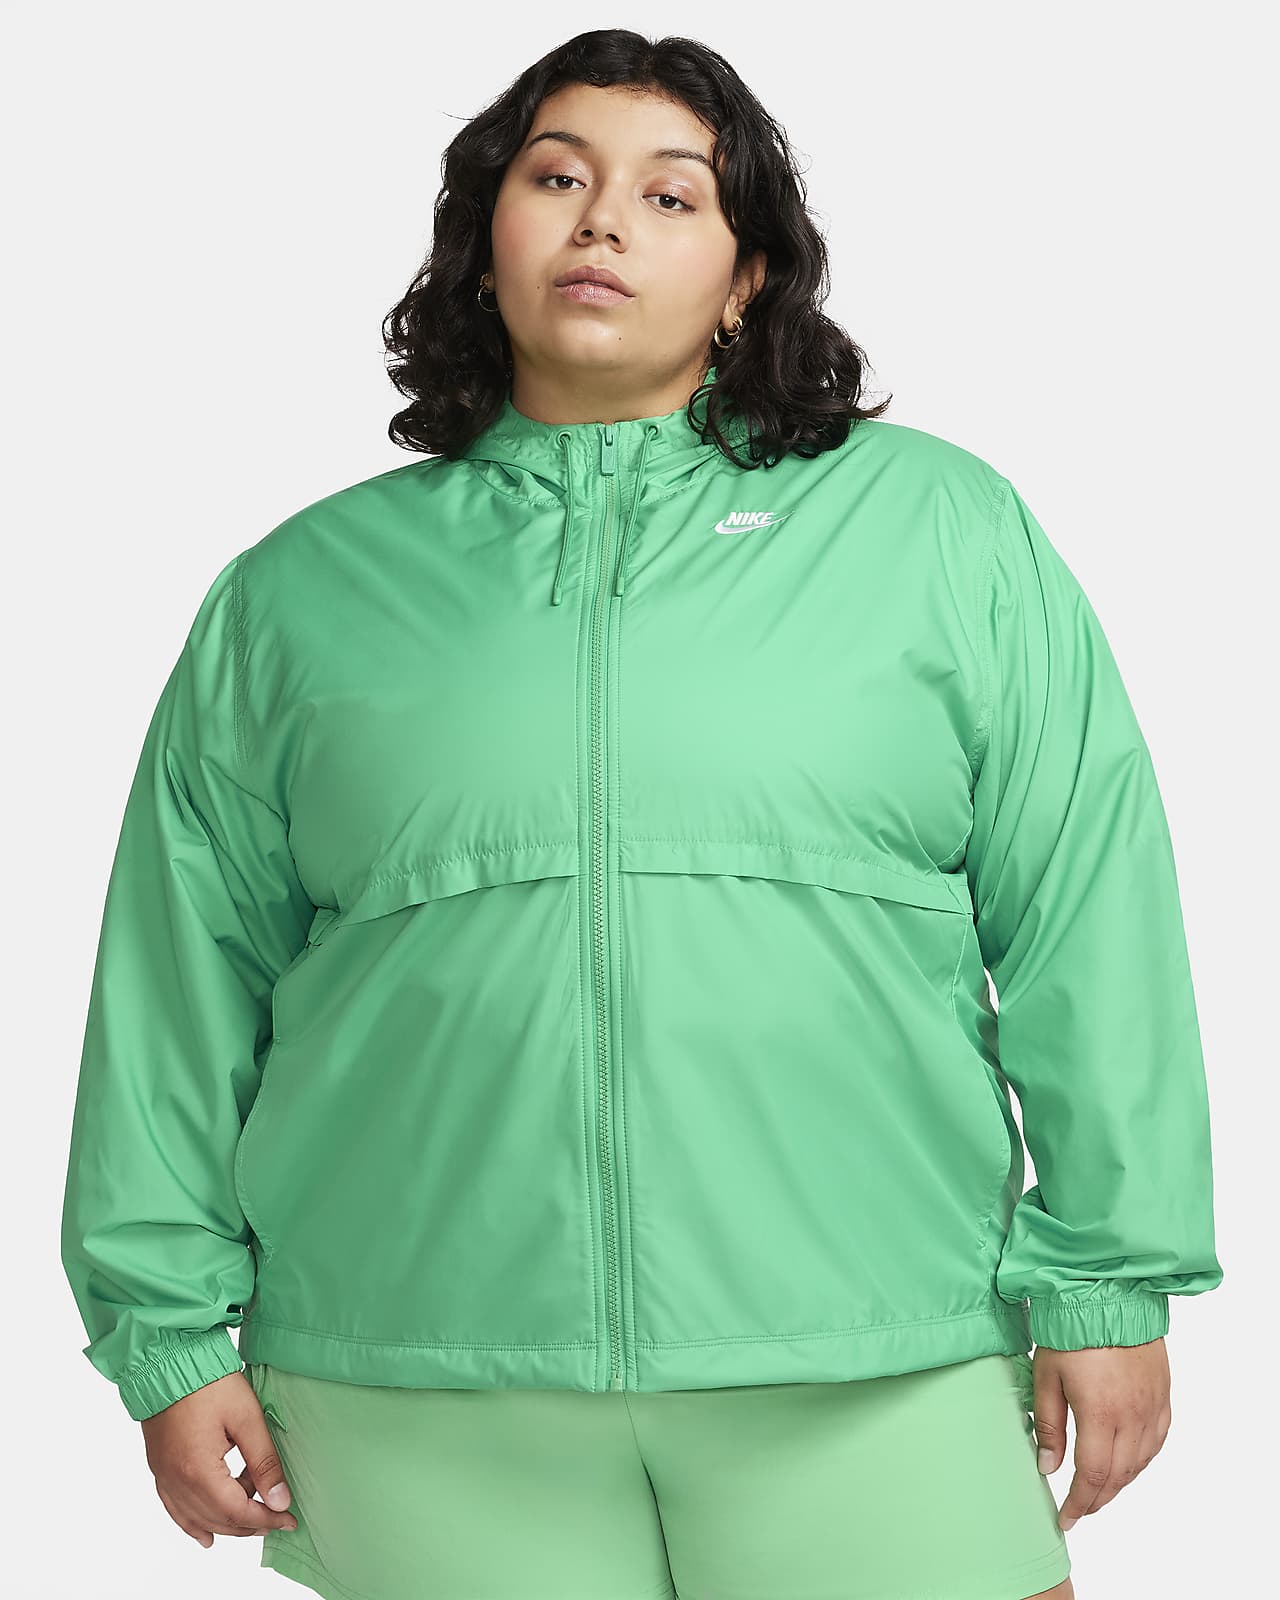 Plus Size Jackets and Coats Archives - Flava House